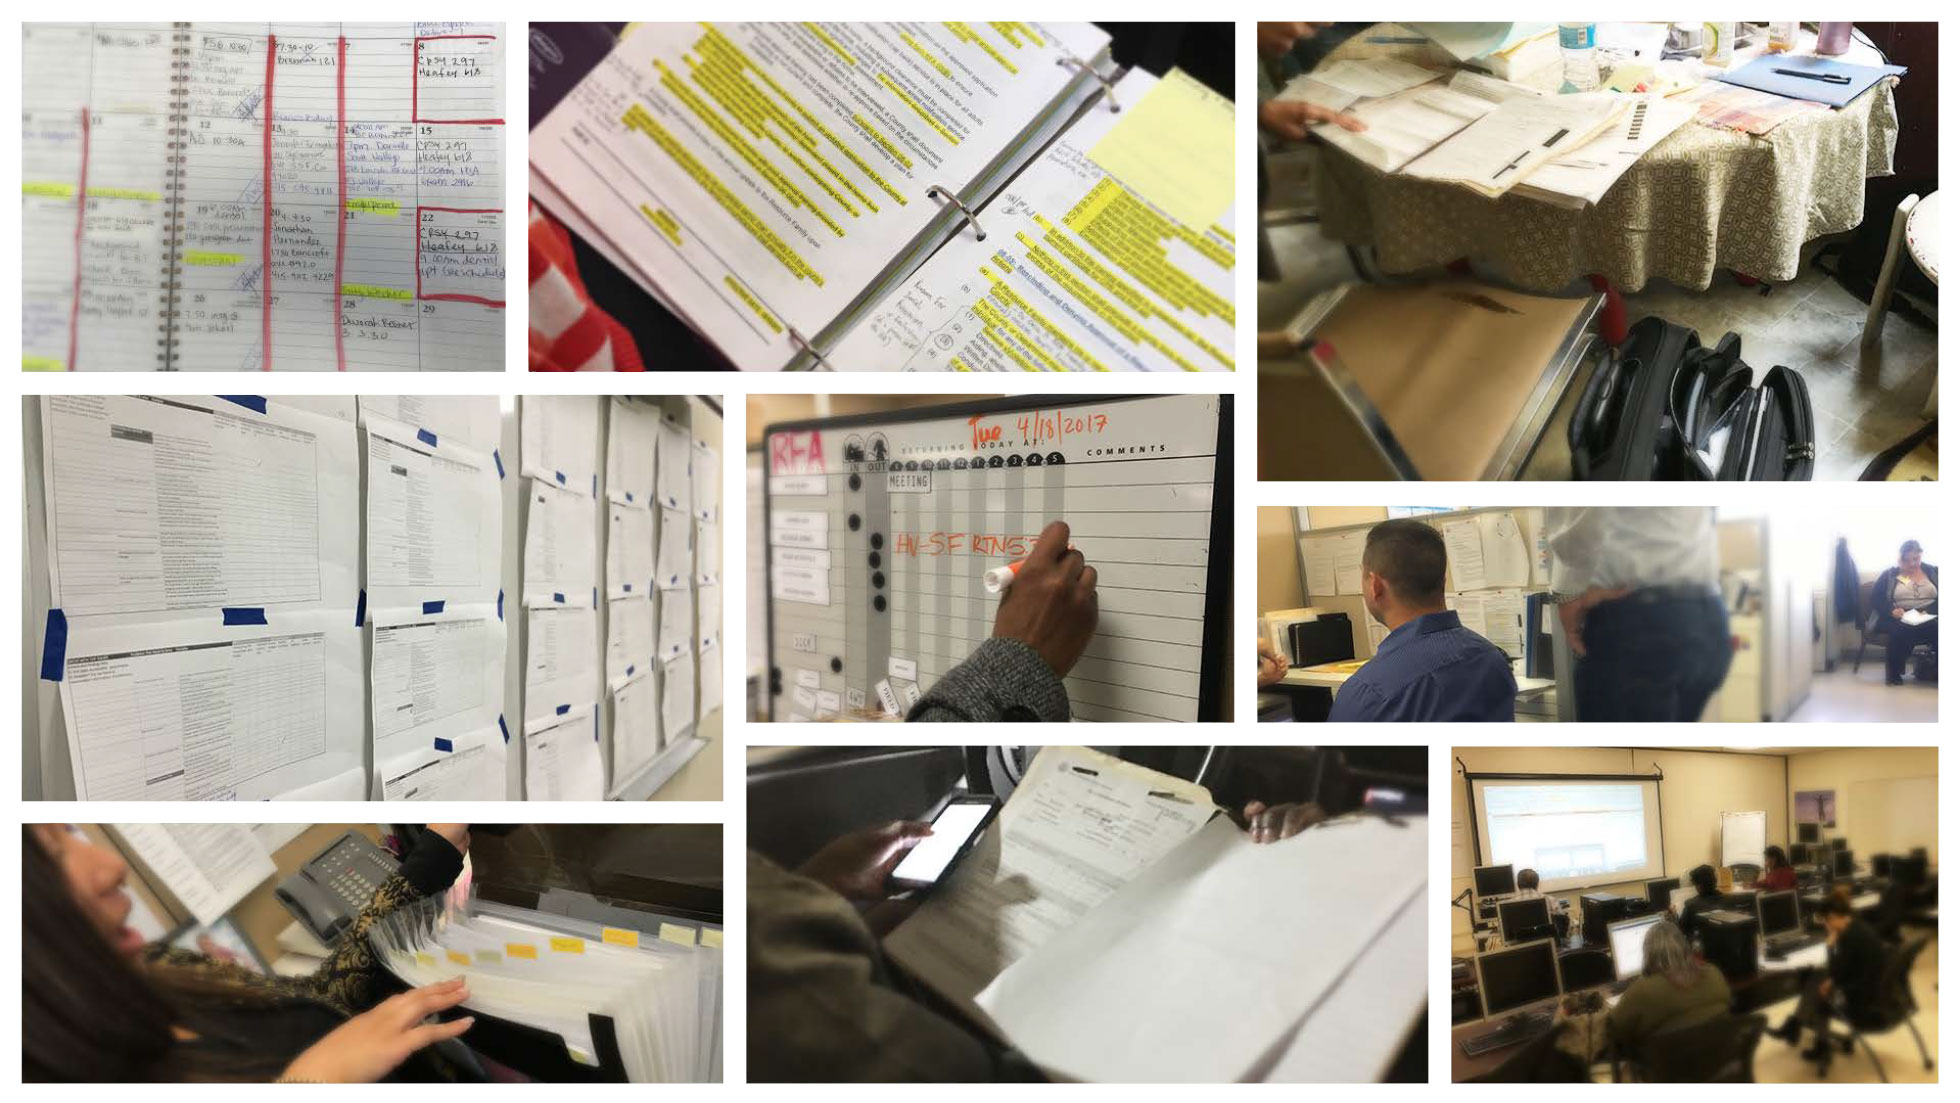 A collage of one of the county visits, showing interviews at county worker cubicle, training lab, home visit at RFA application's home, file folders, and whiteboard for home visits.